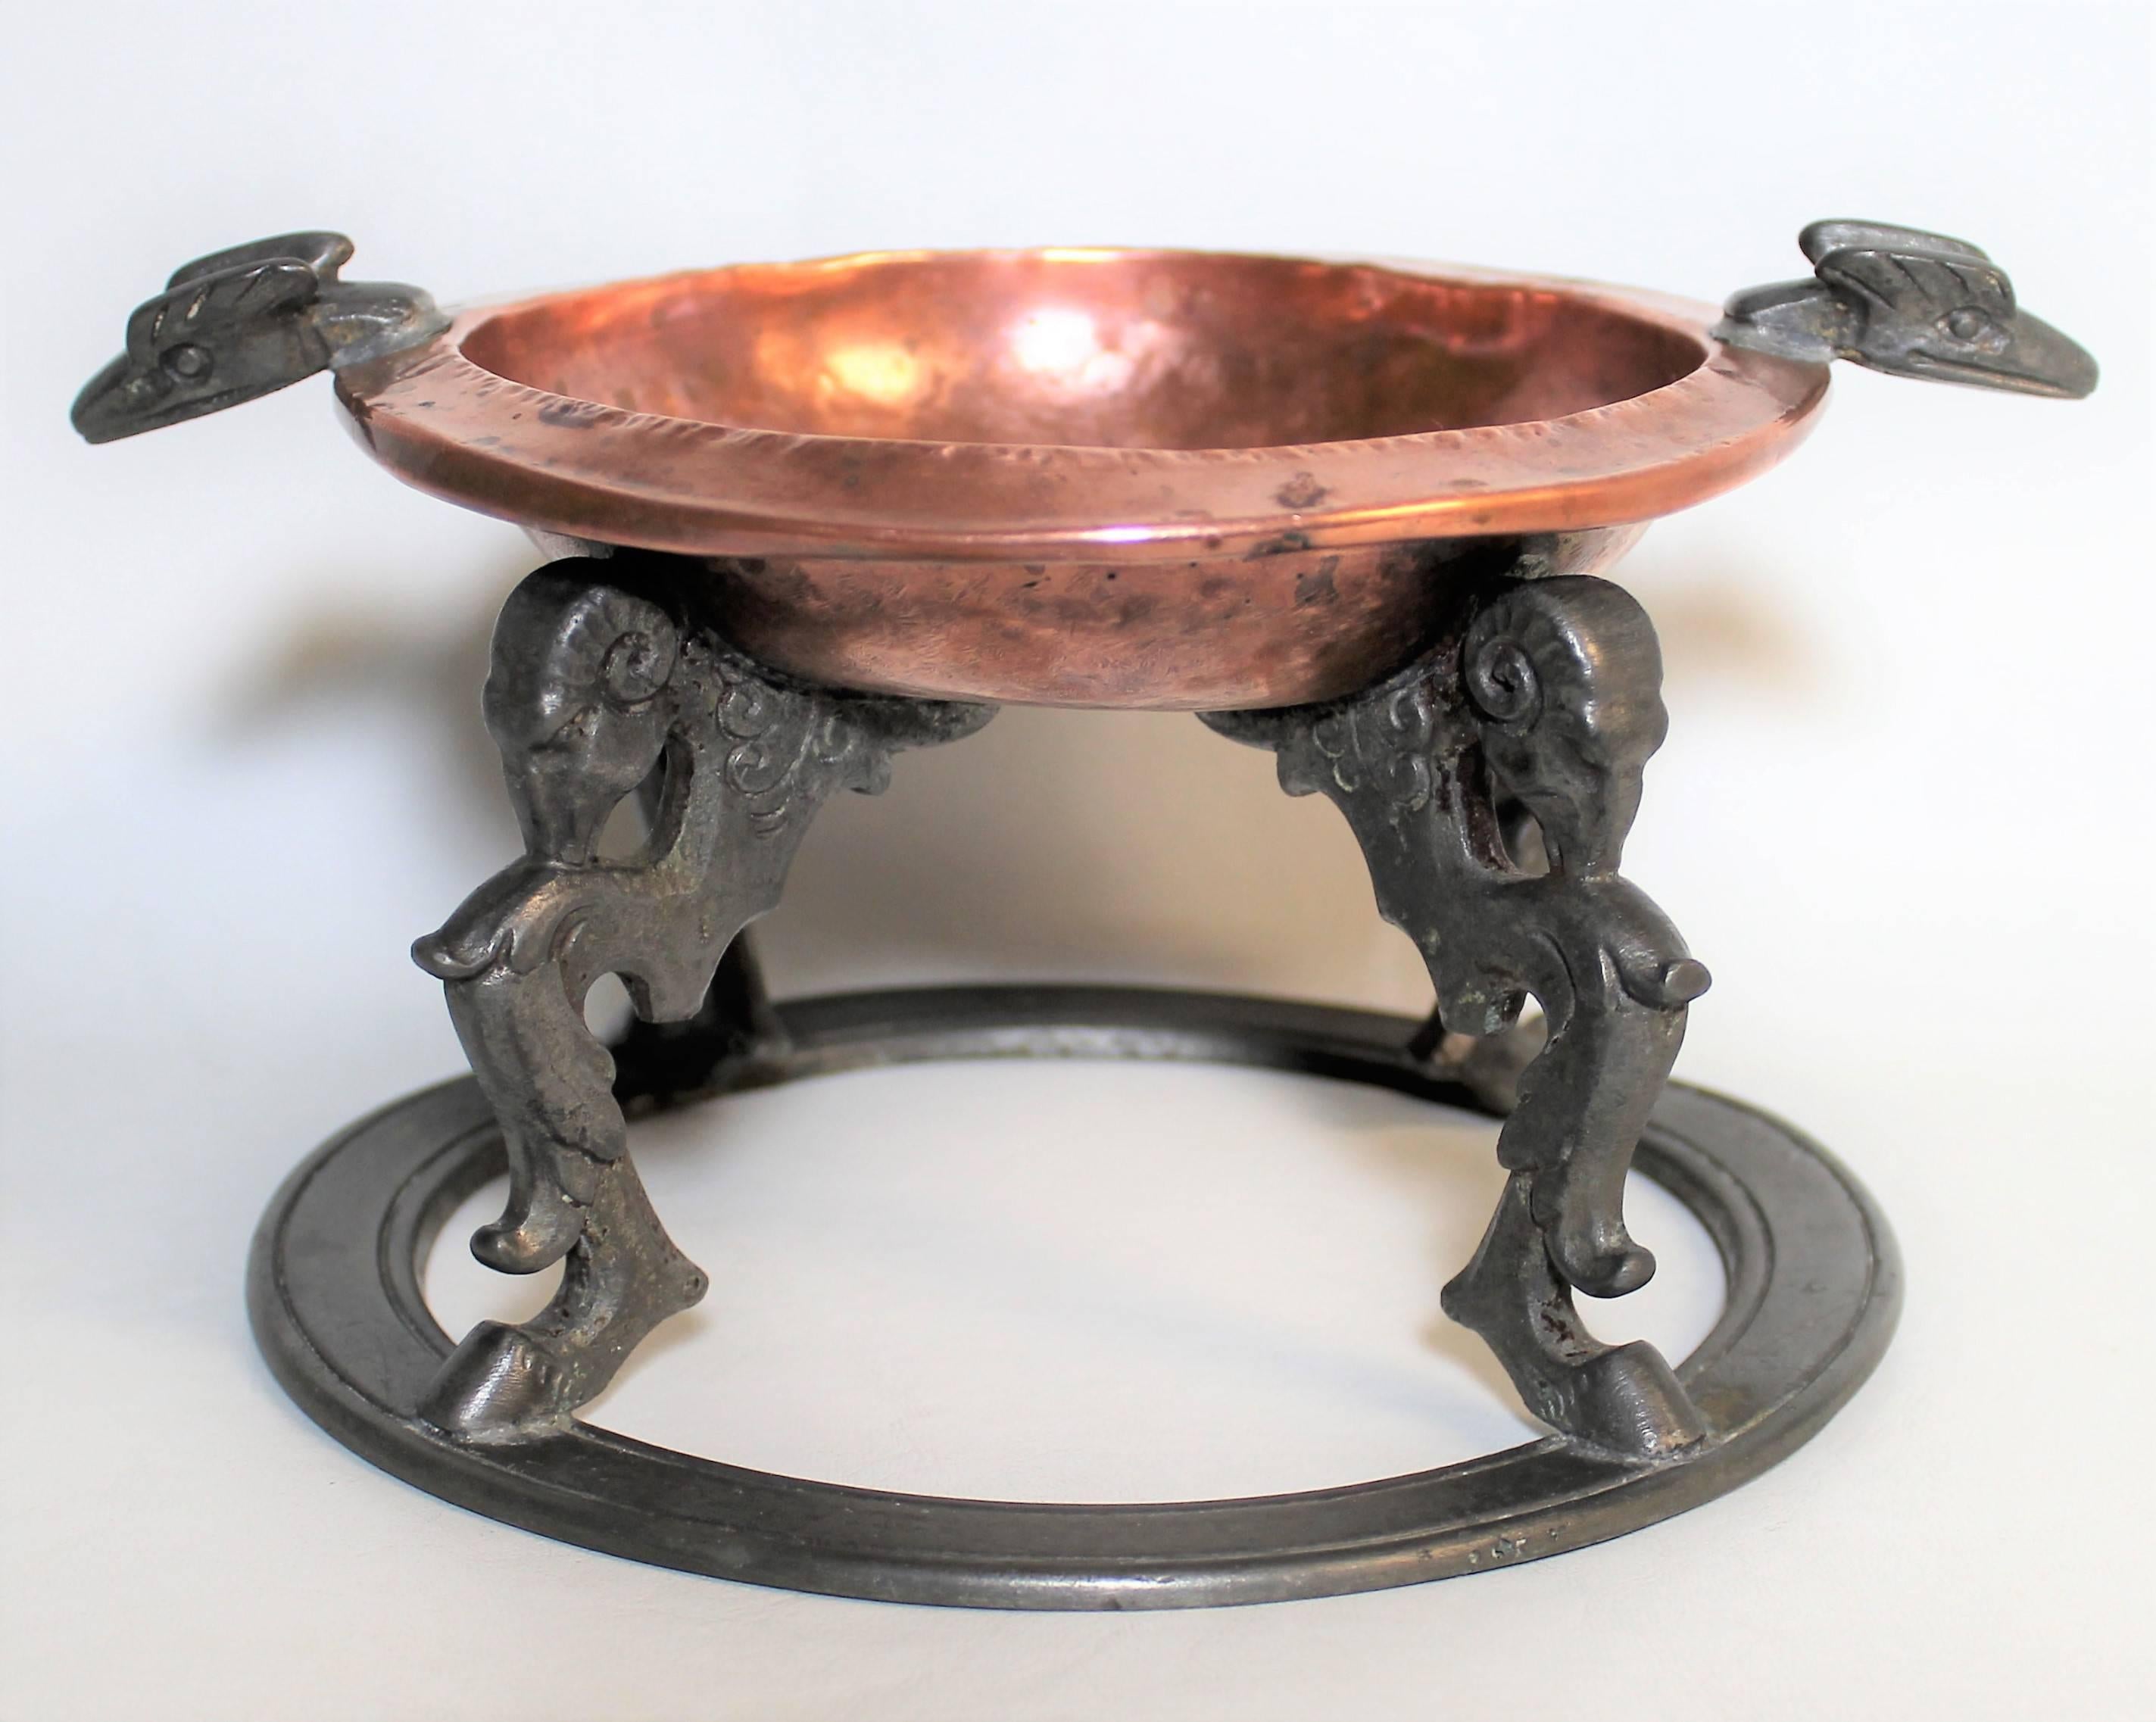 Oscar Bach New York Studios copper and pewter ashtray.